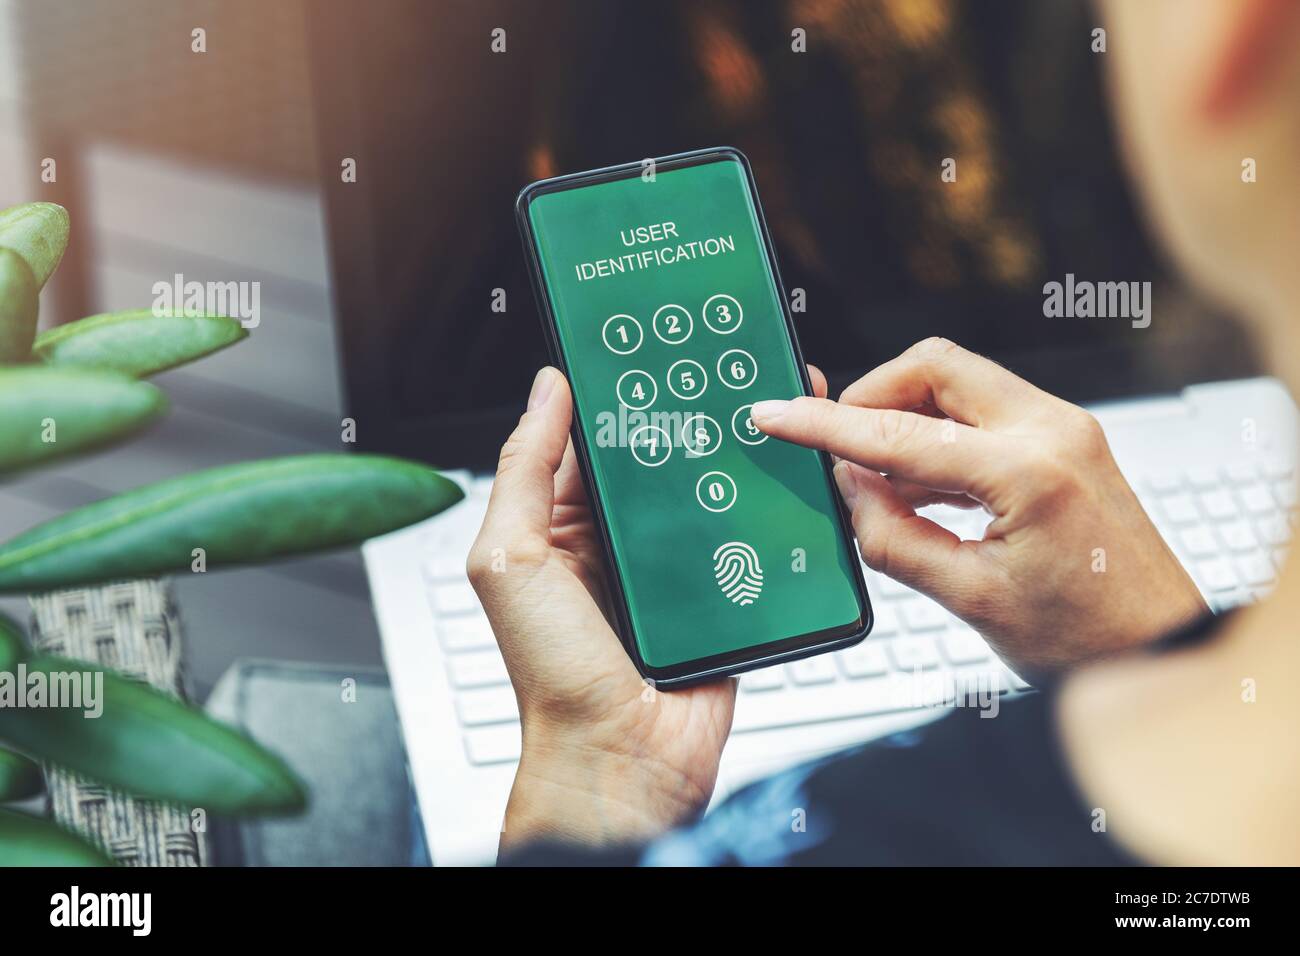 cyber security - woman using mobile application in smartphone for internet banking user authentication Stock Photo